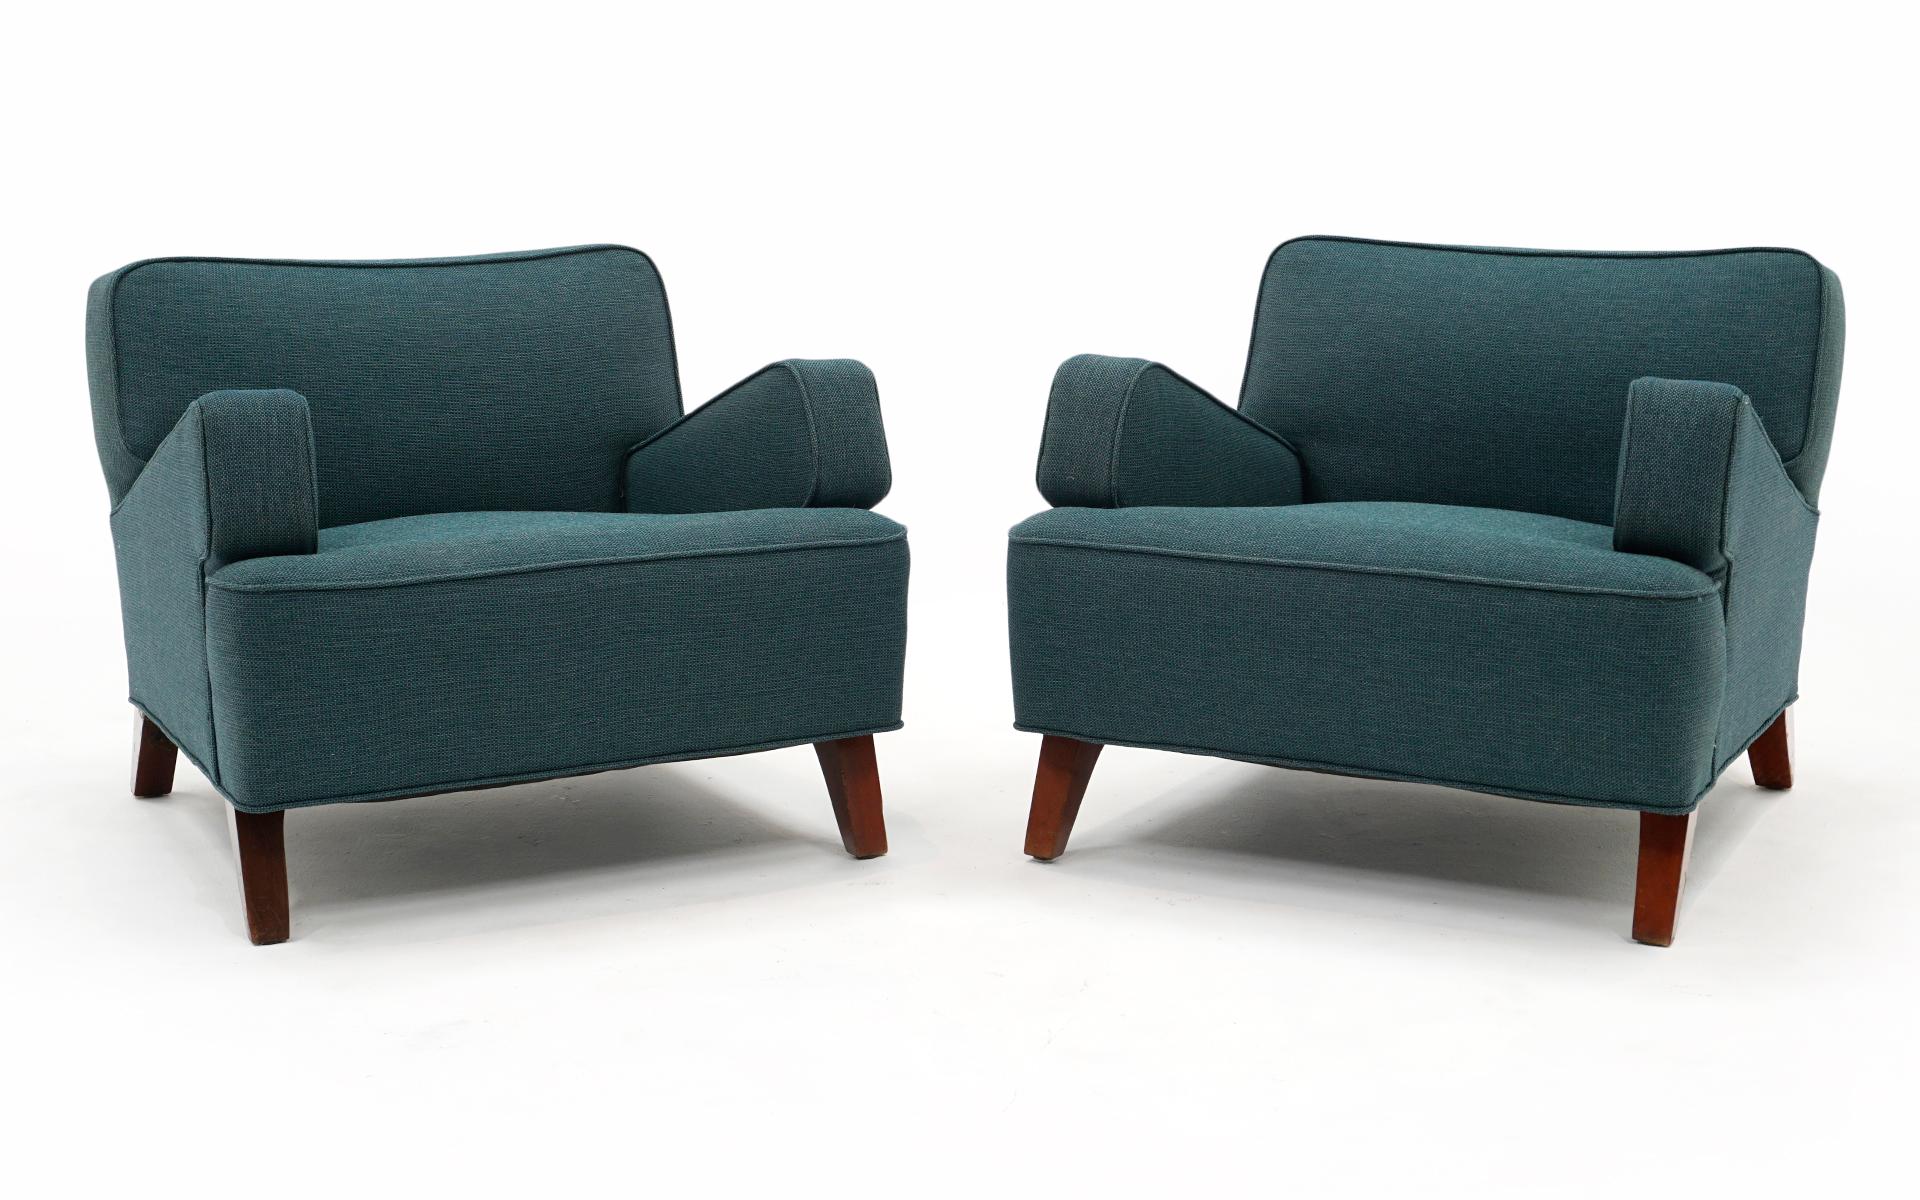 Early pair of angle arm lounge chairs designed by Jens Risom. These are one of Risom earliest designs after leaving his position as design director for Knoll. The chairs retain the original blue-green fabric which is free of tears, stains or